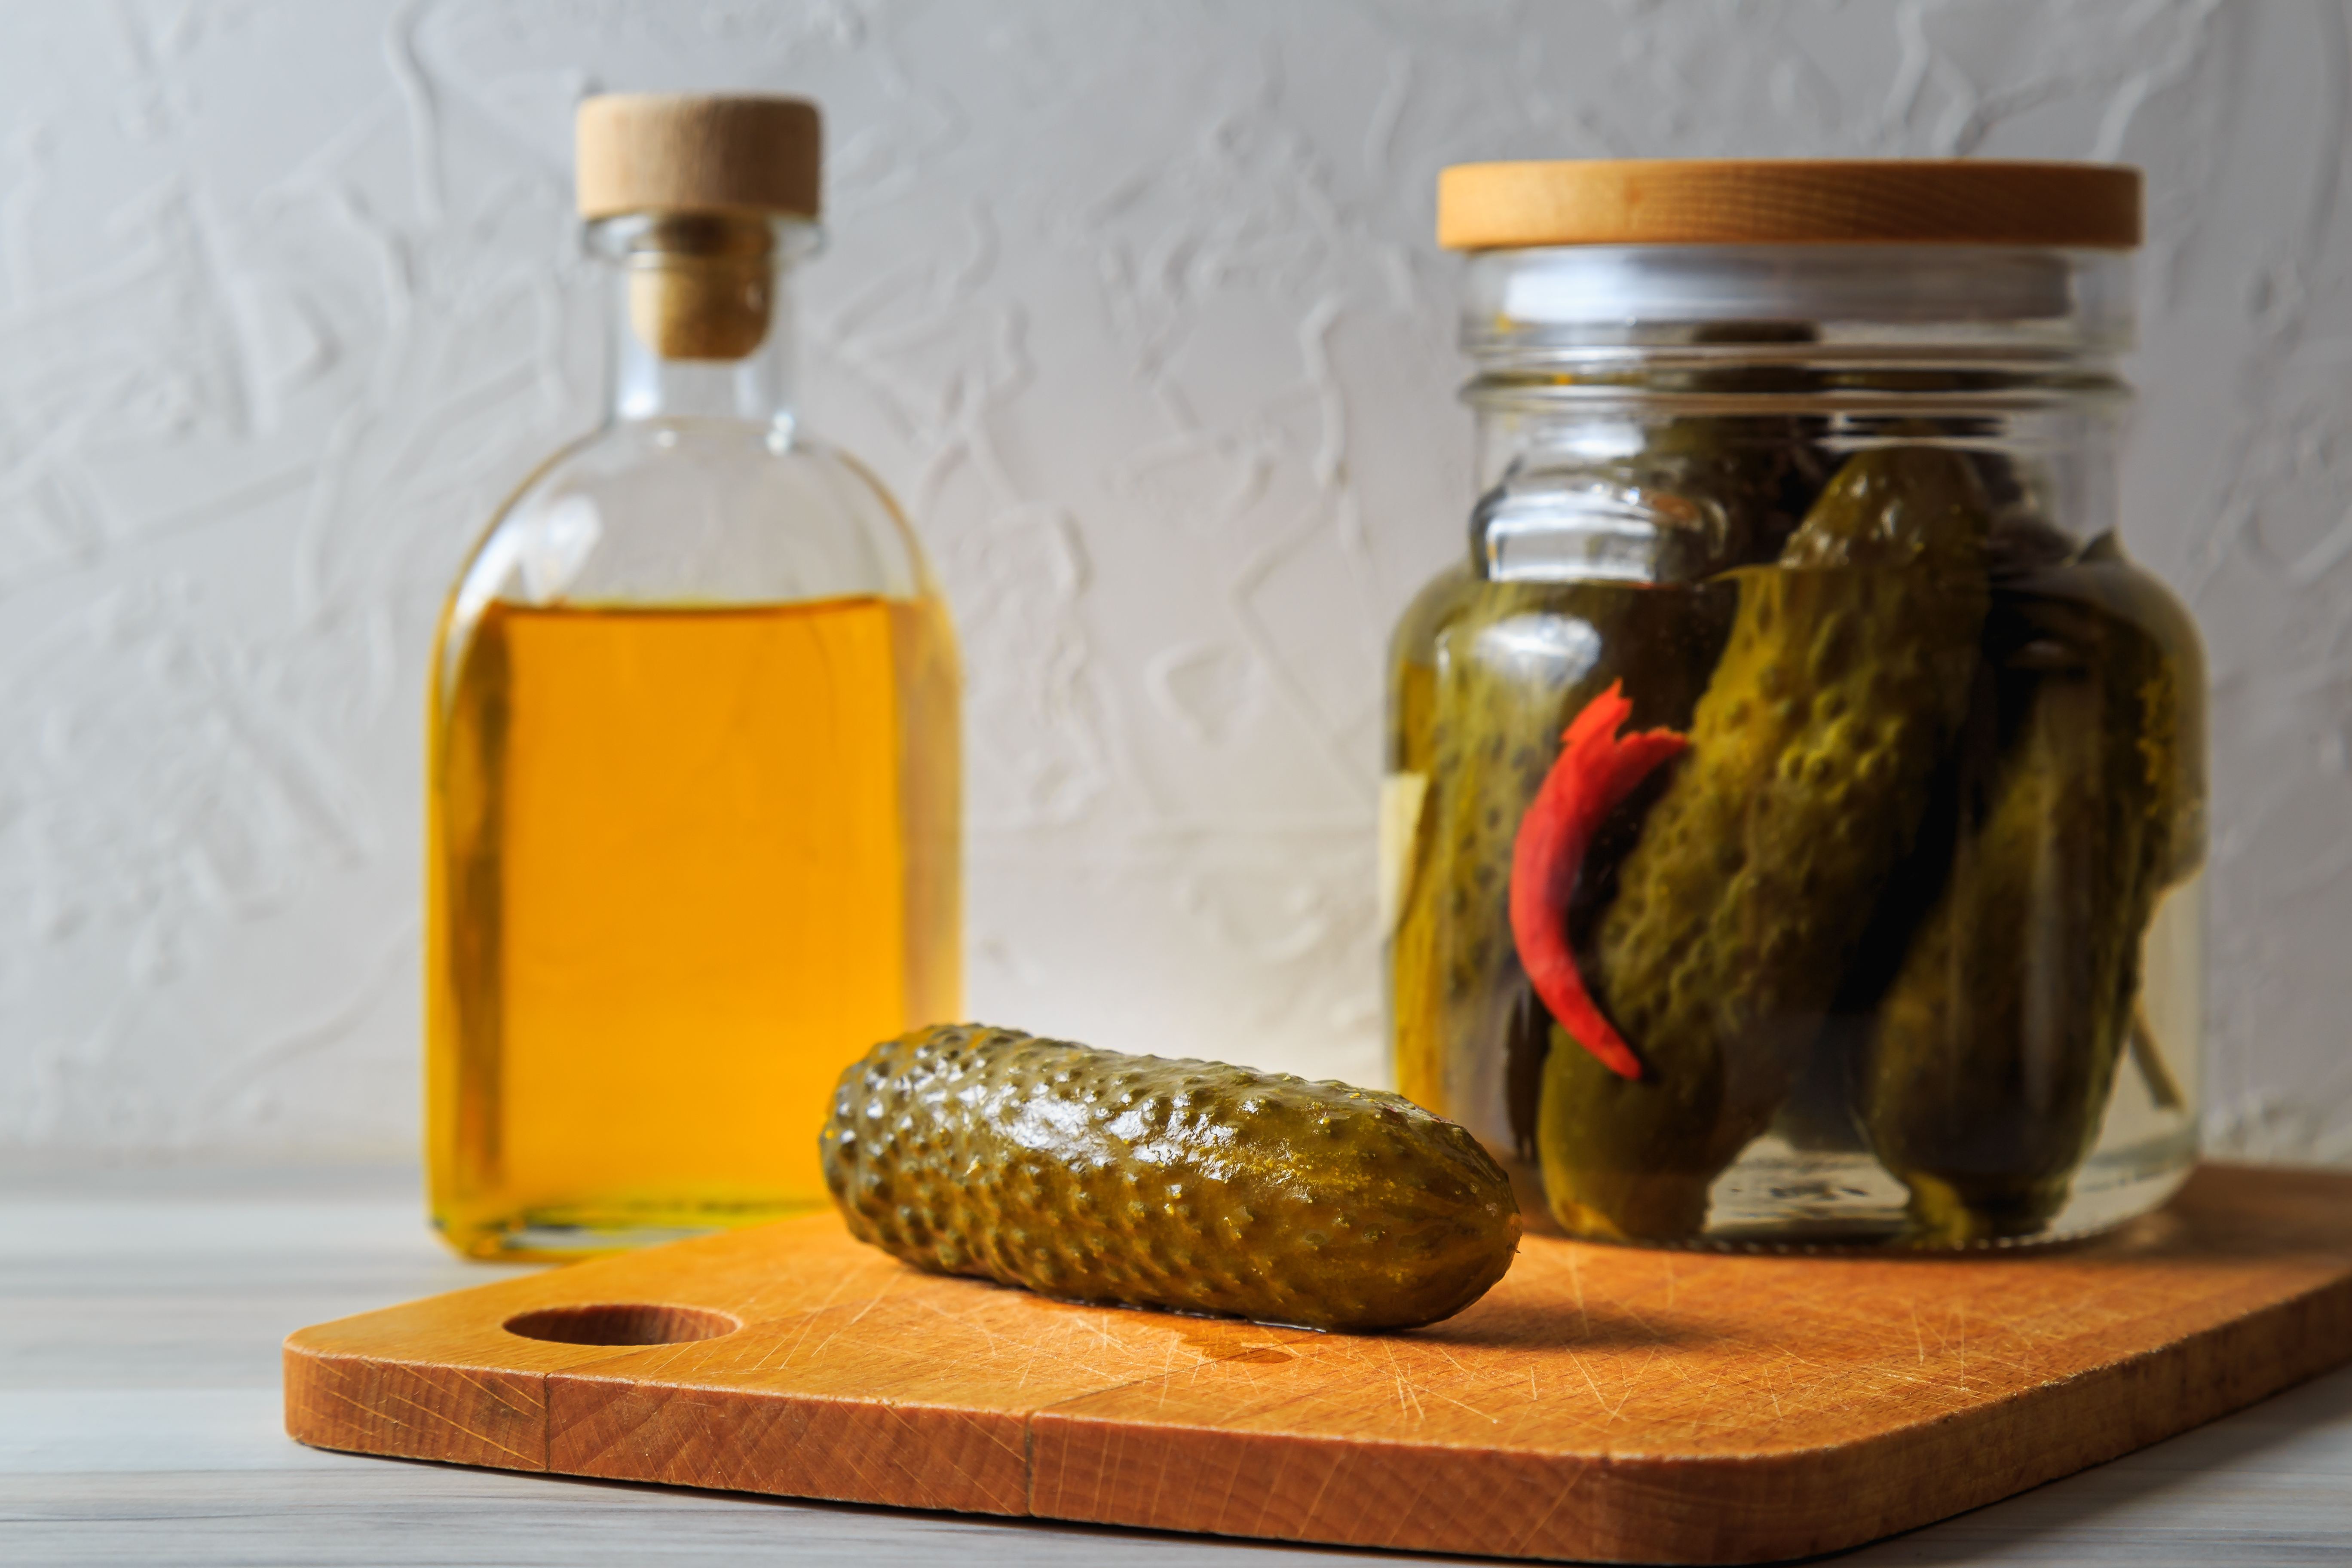 A jar of pickles makes a delightful retirement gift for seniors.